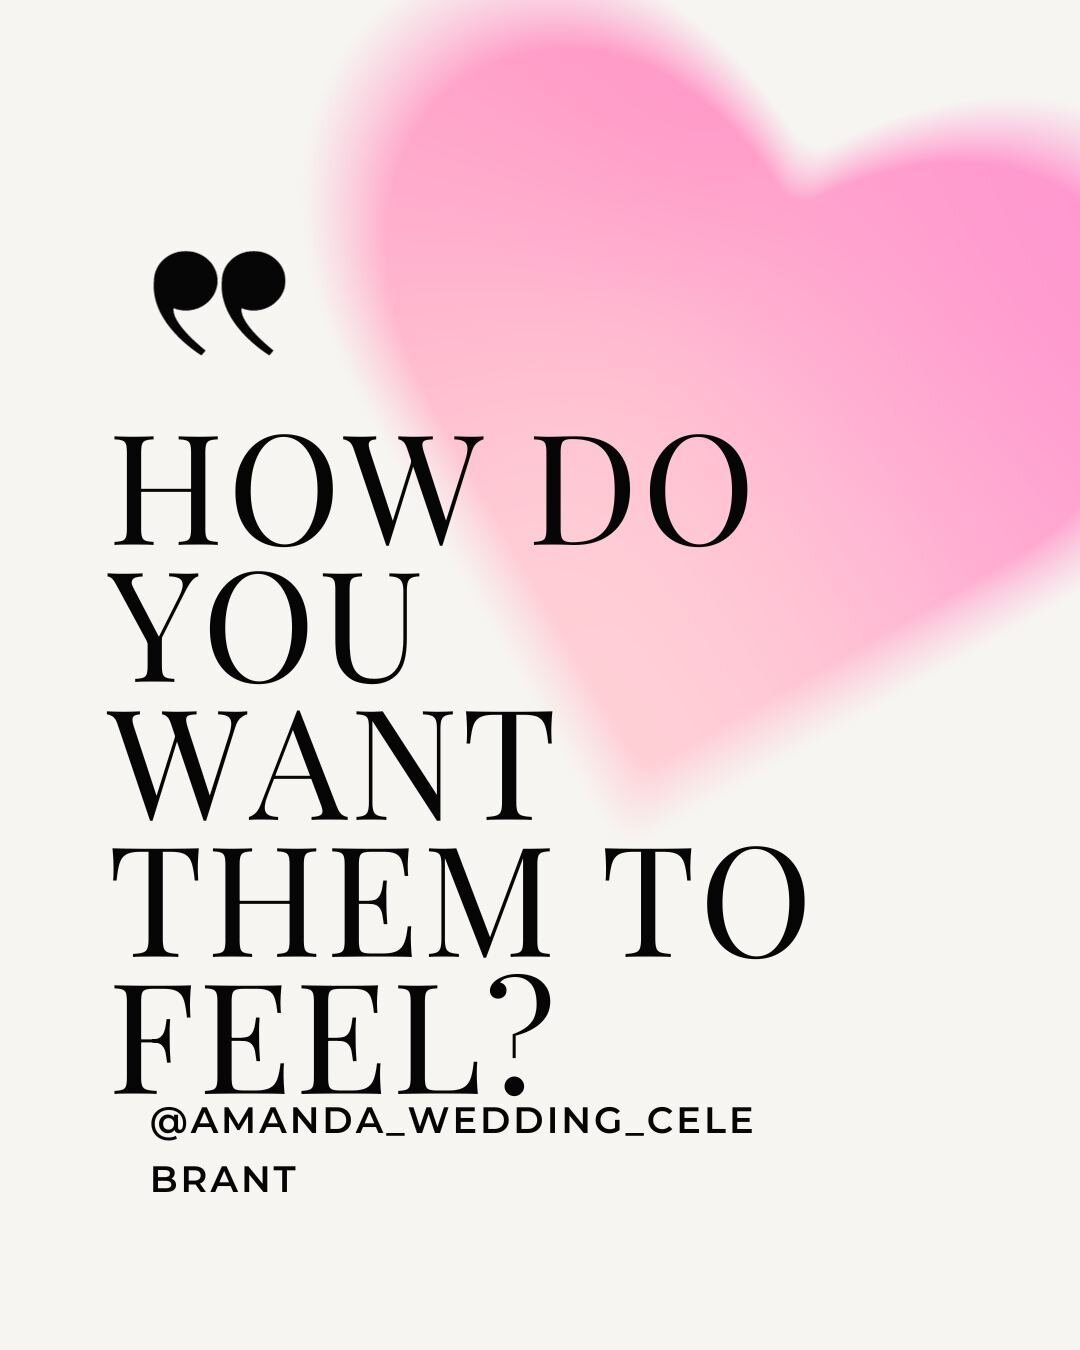 Wedding speeches and ceremonies...

When planning a speech always start with the end in mind and this important question.

How do you want your audience to feel at the end?

I&rsquo;ve been a coach and speaker for years and although I&rsquo;d always 